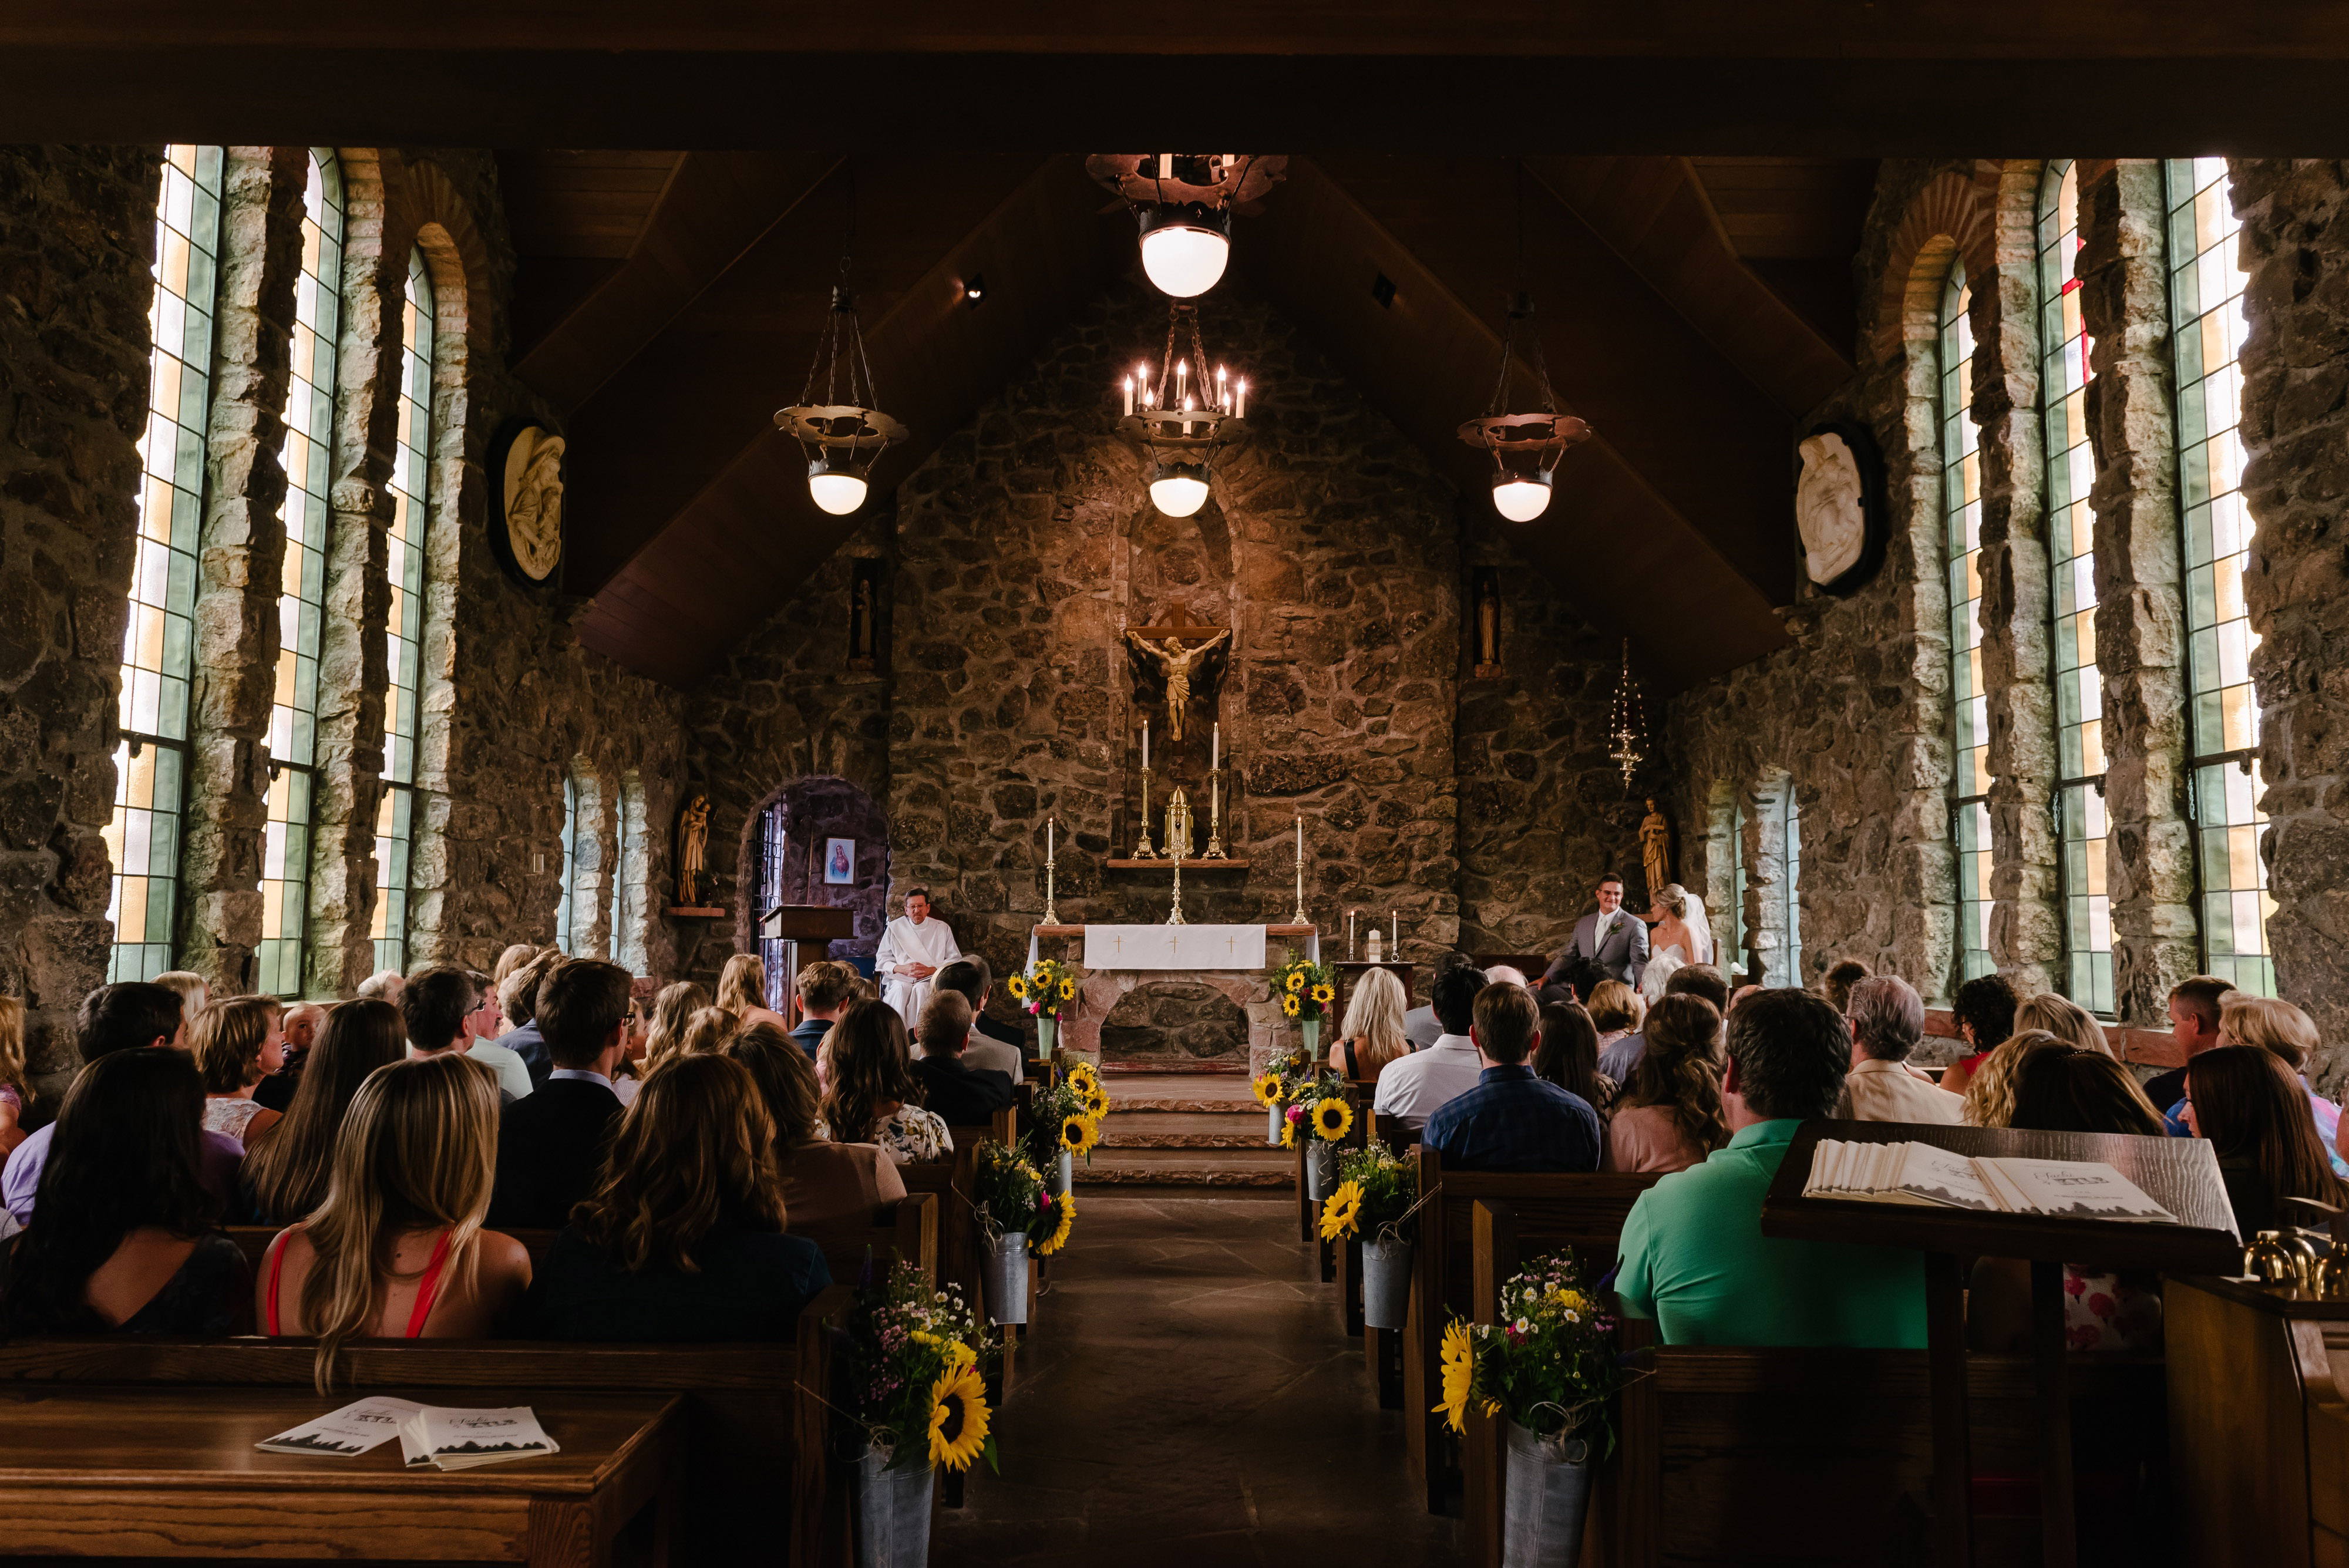 People Inside in the church image - Free stock photo - Public Domain ...